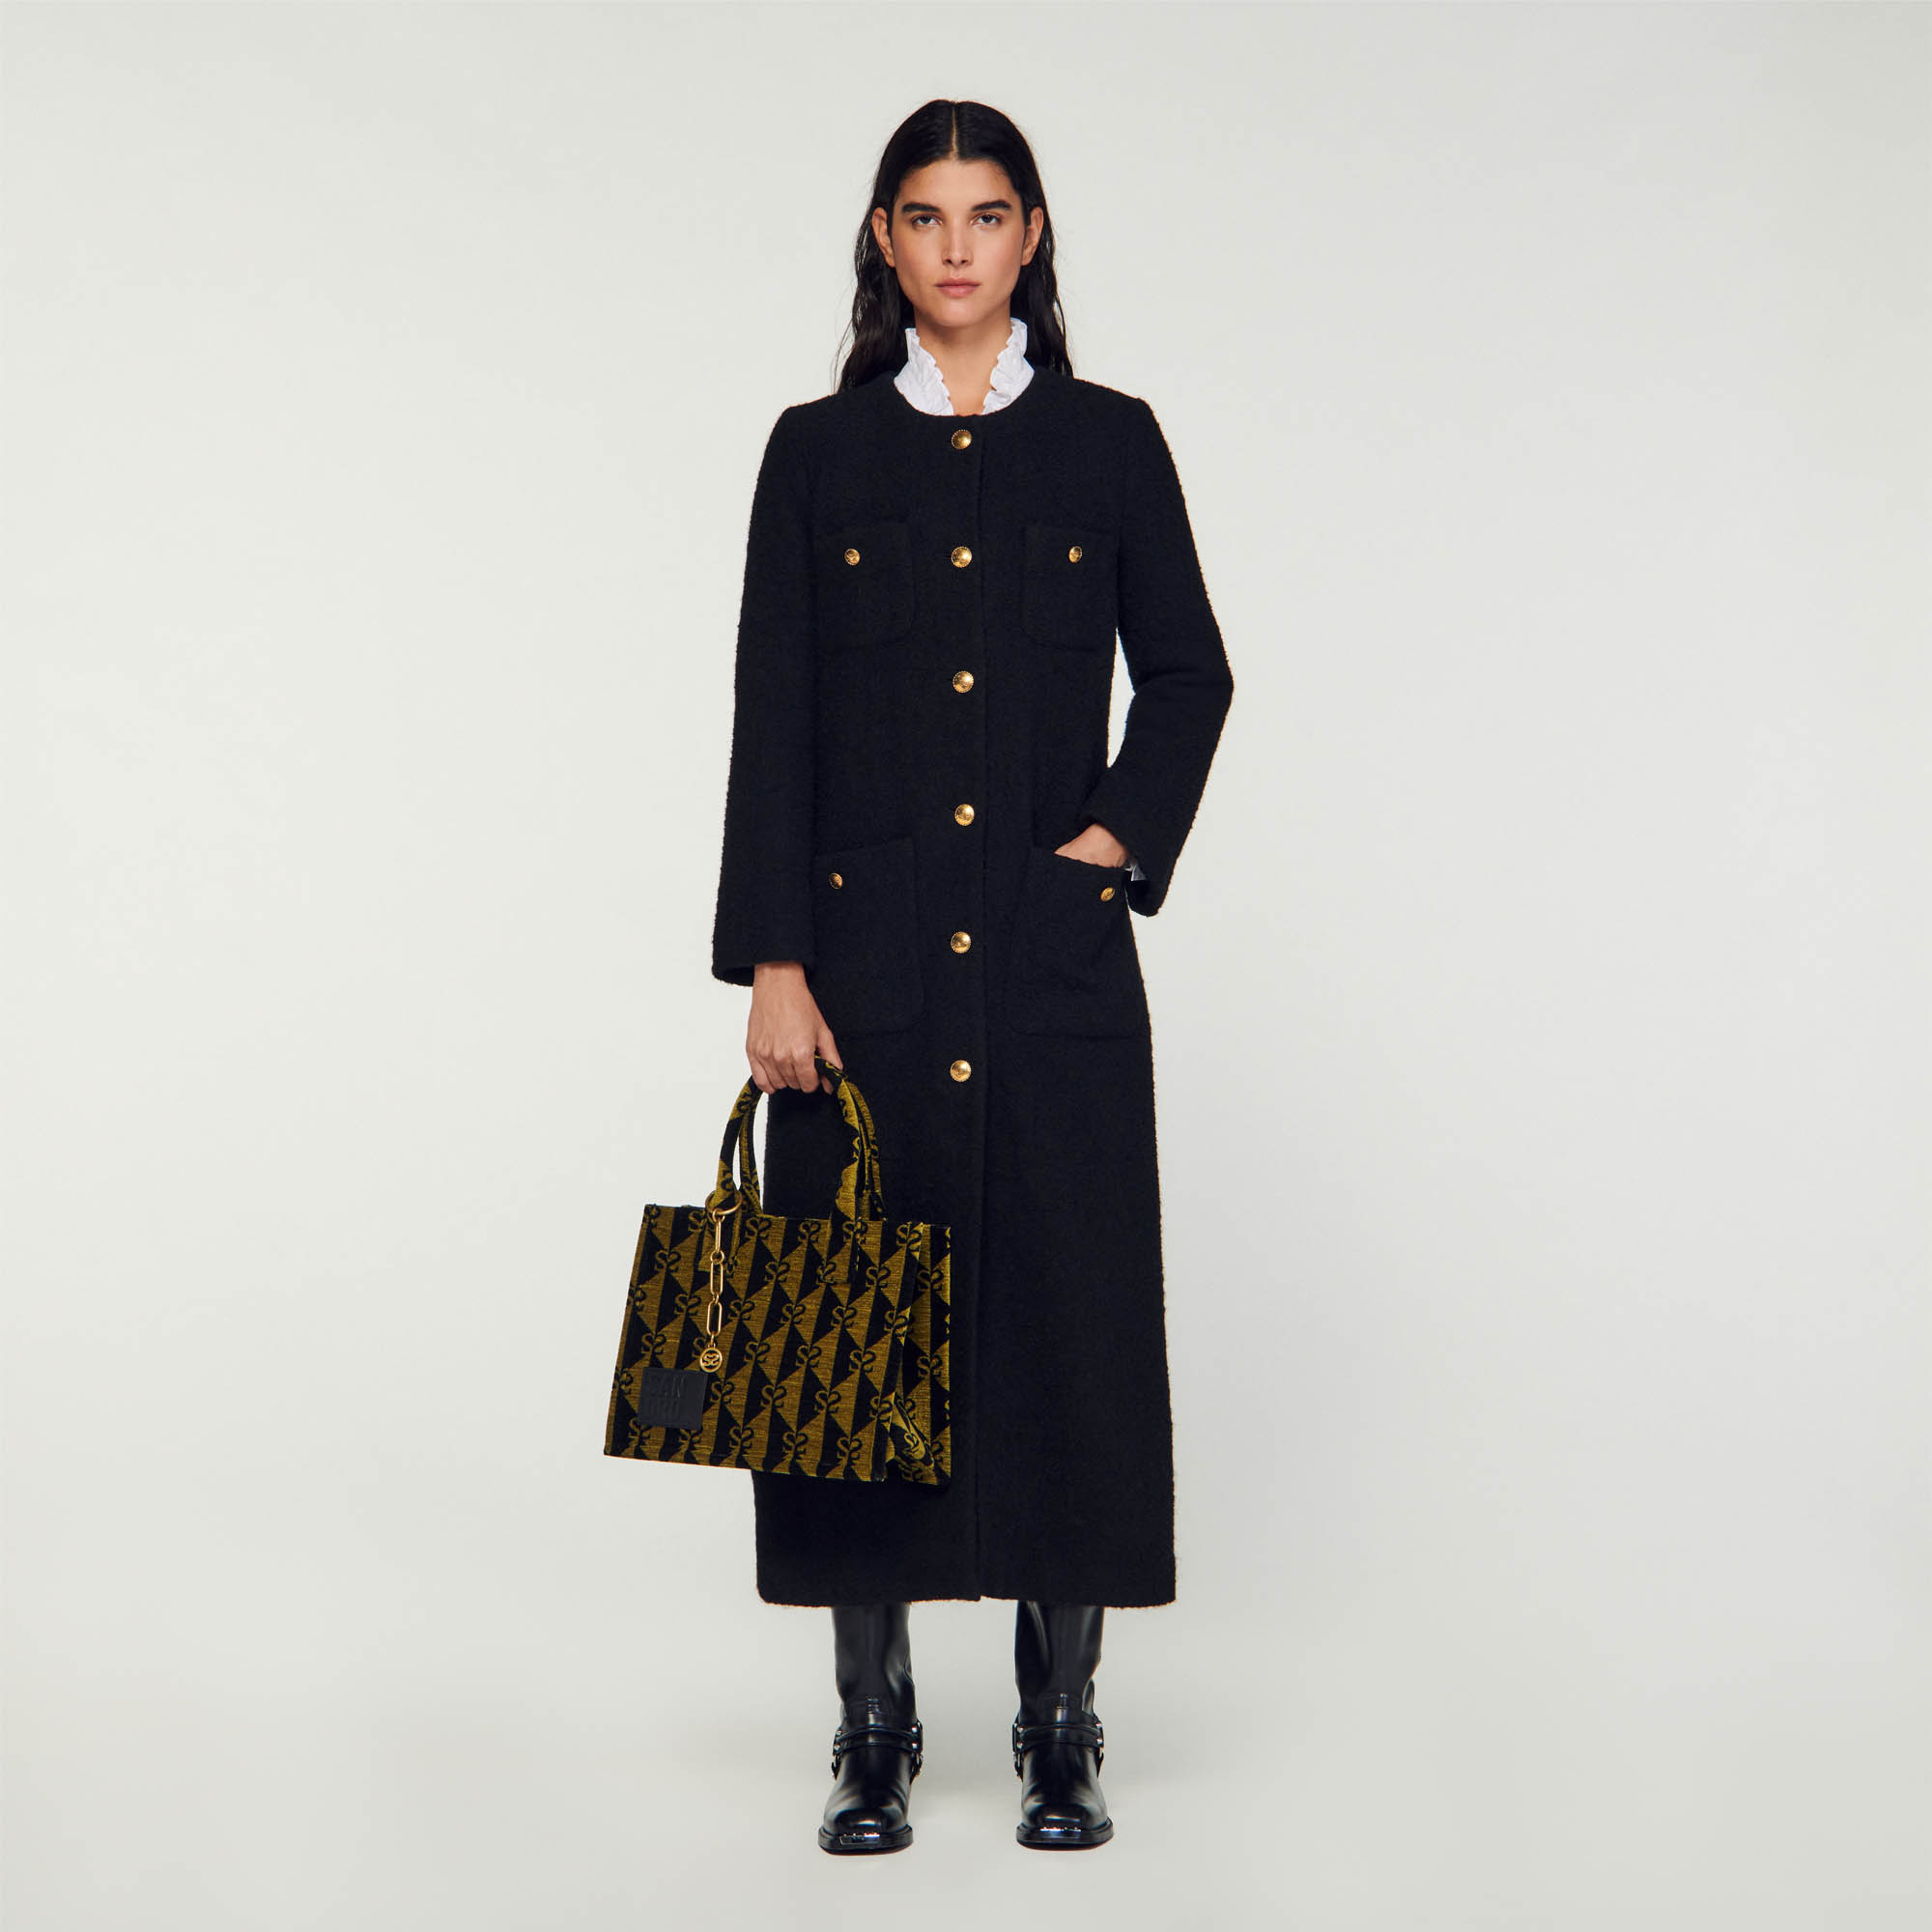 Sandro cotton Long coat in bouclé fabric with round neckline, patch pockets, long sleeves, fastened with gold-tone buttons